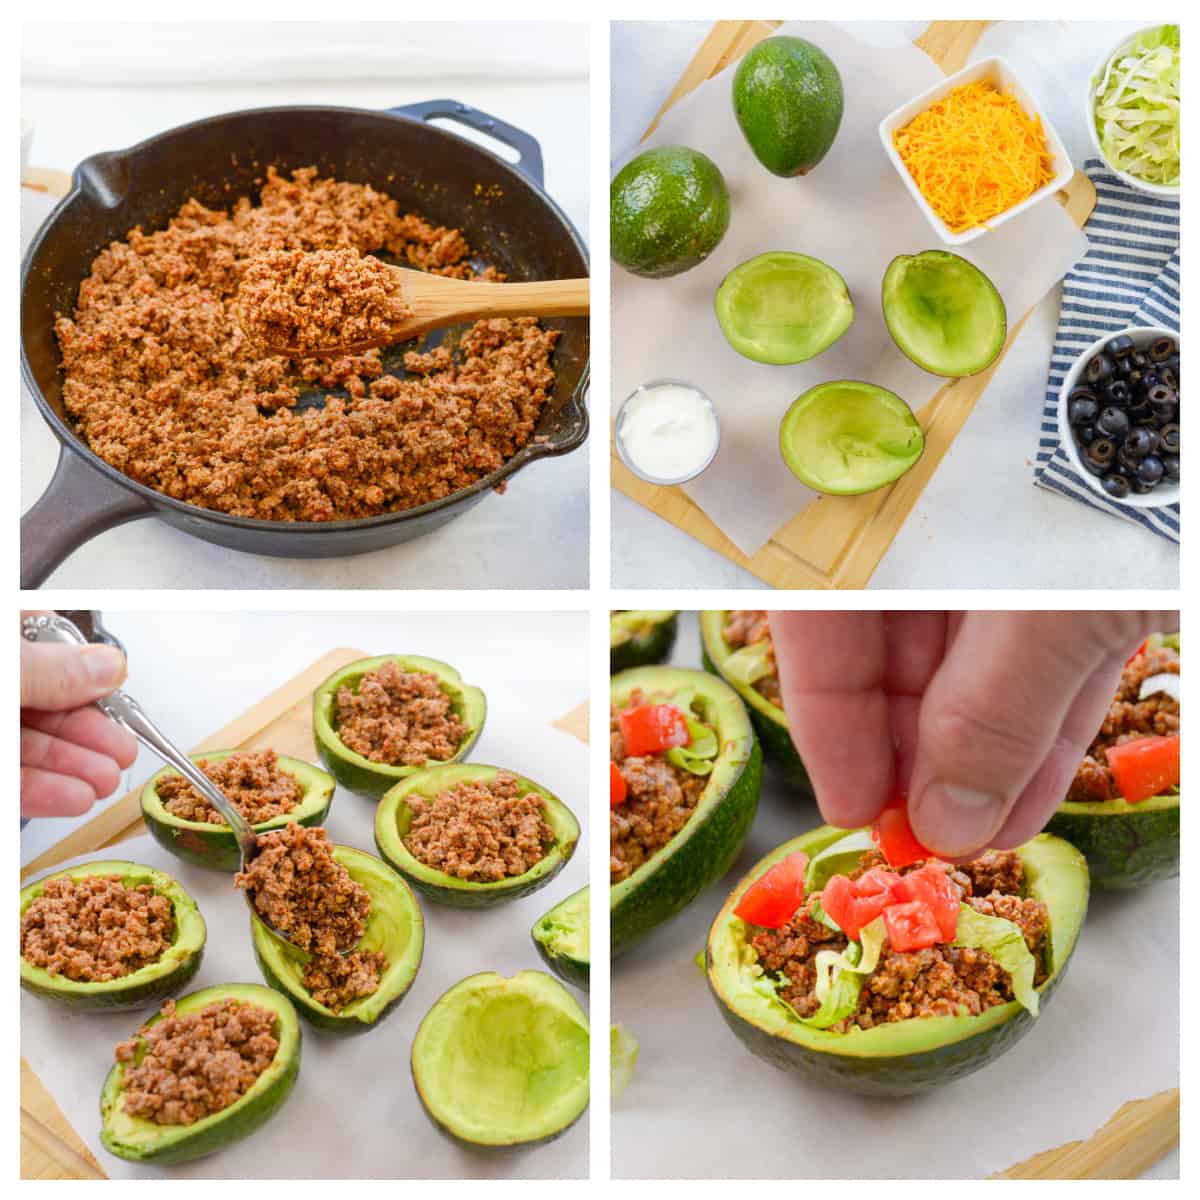 Collage showing how to make stuffed avocado.